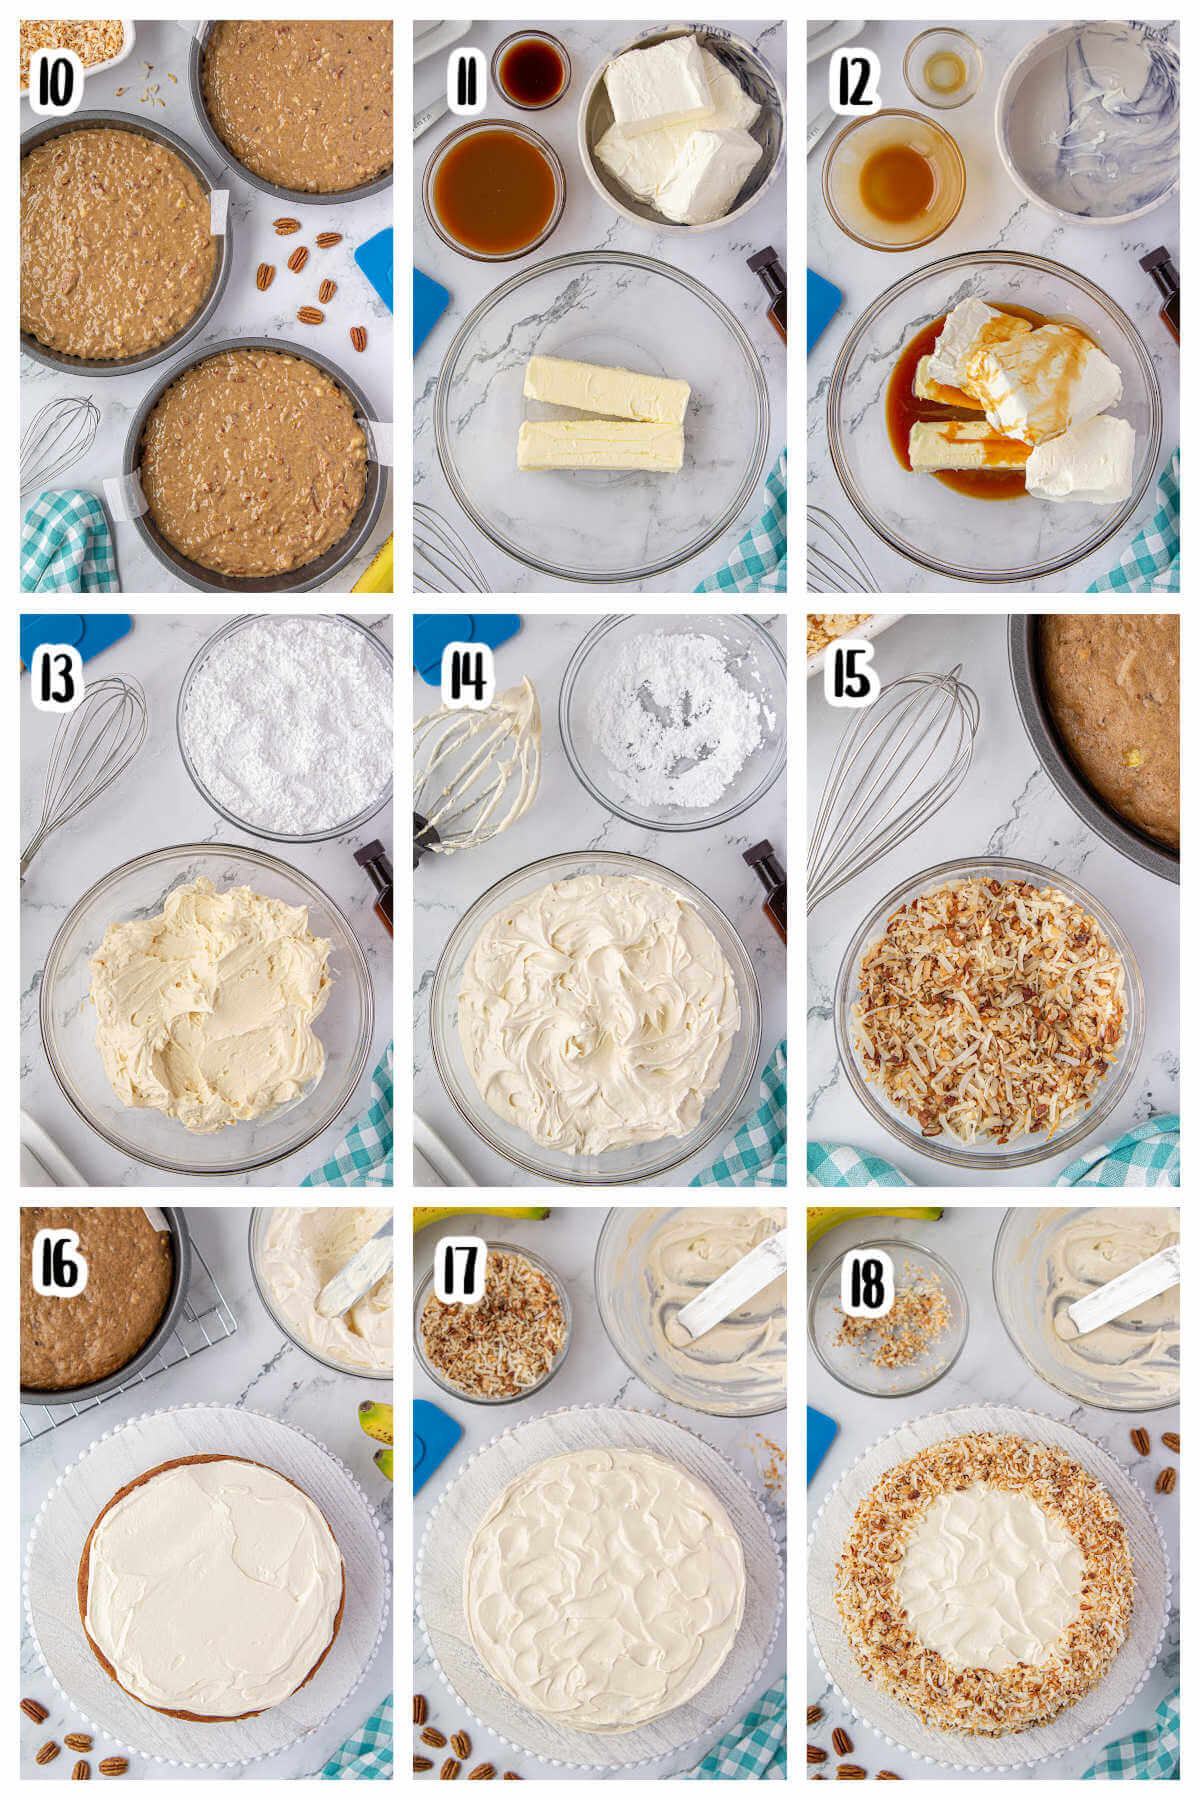 Steps 10 to 18 for frosting and decorating the recipe for Hummingbird cake.